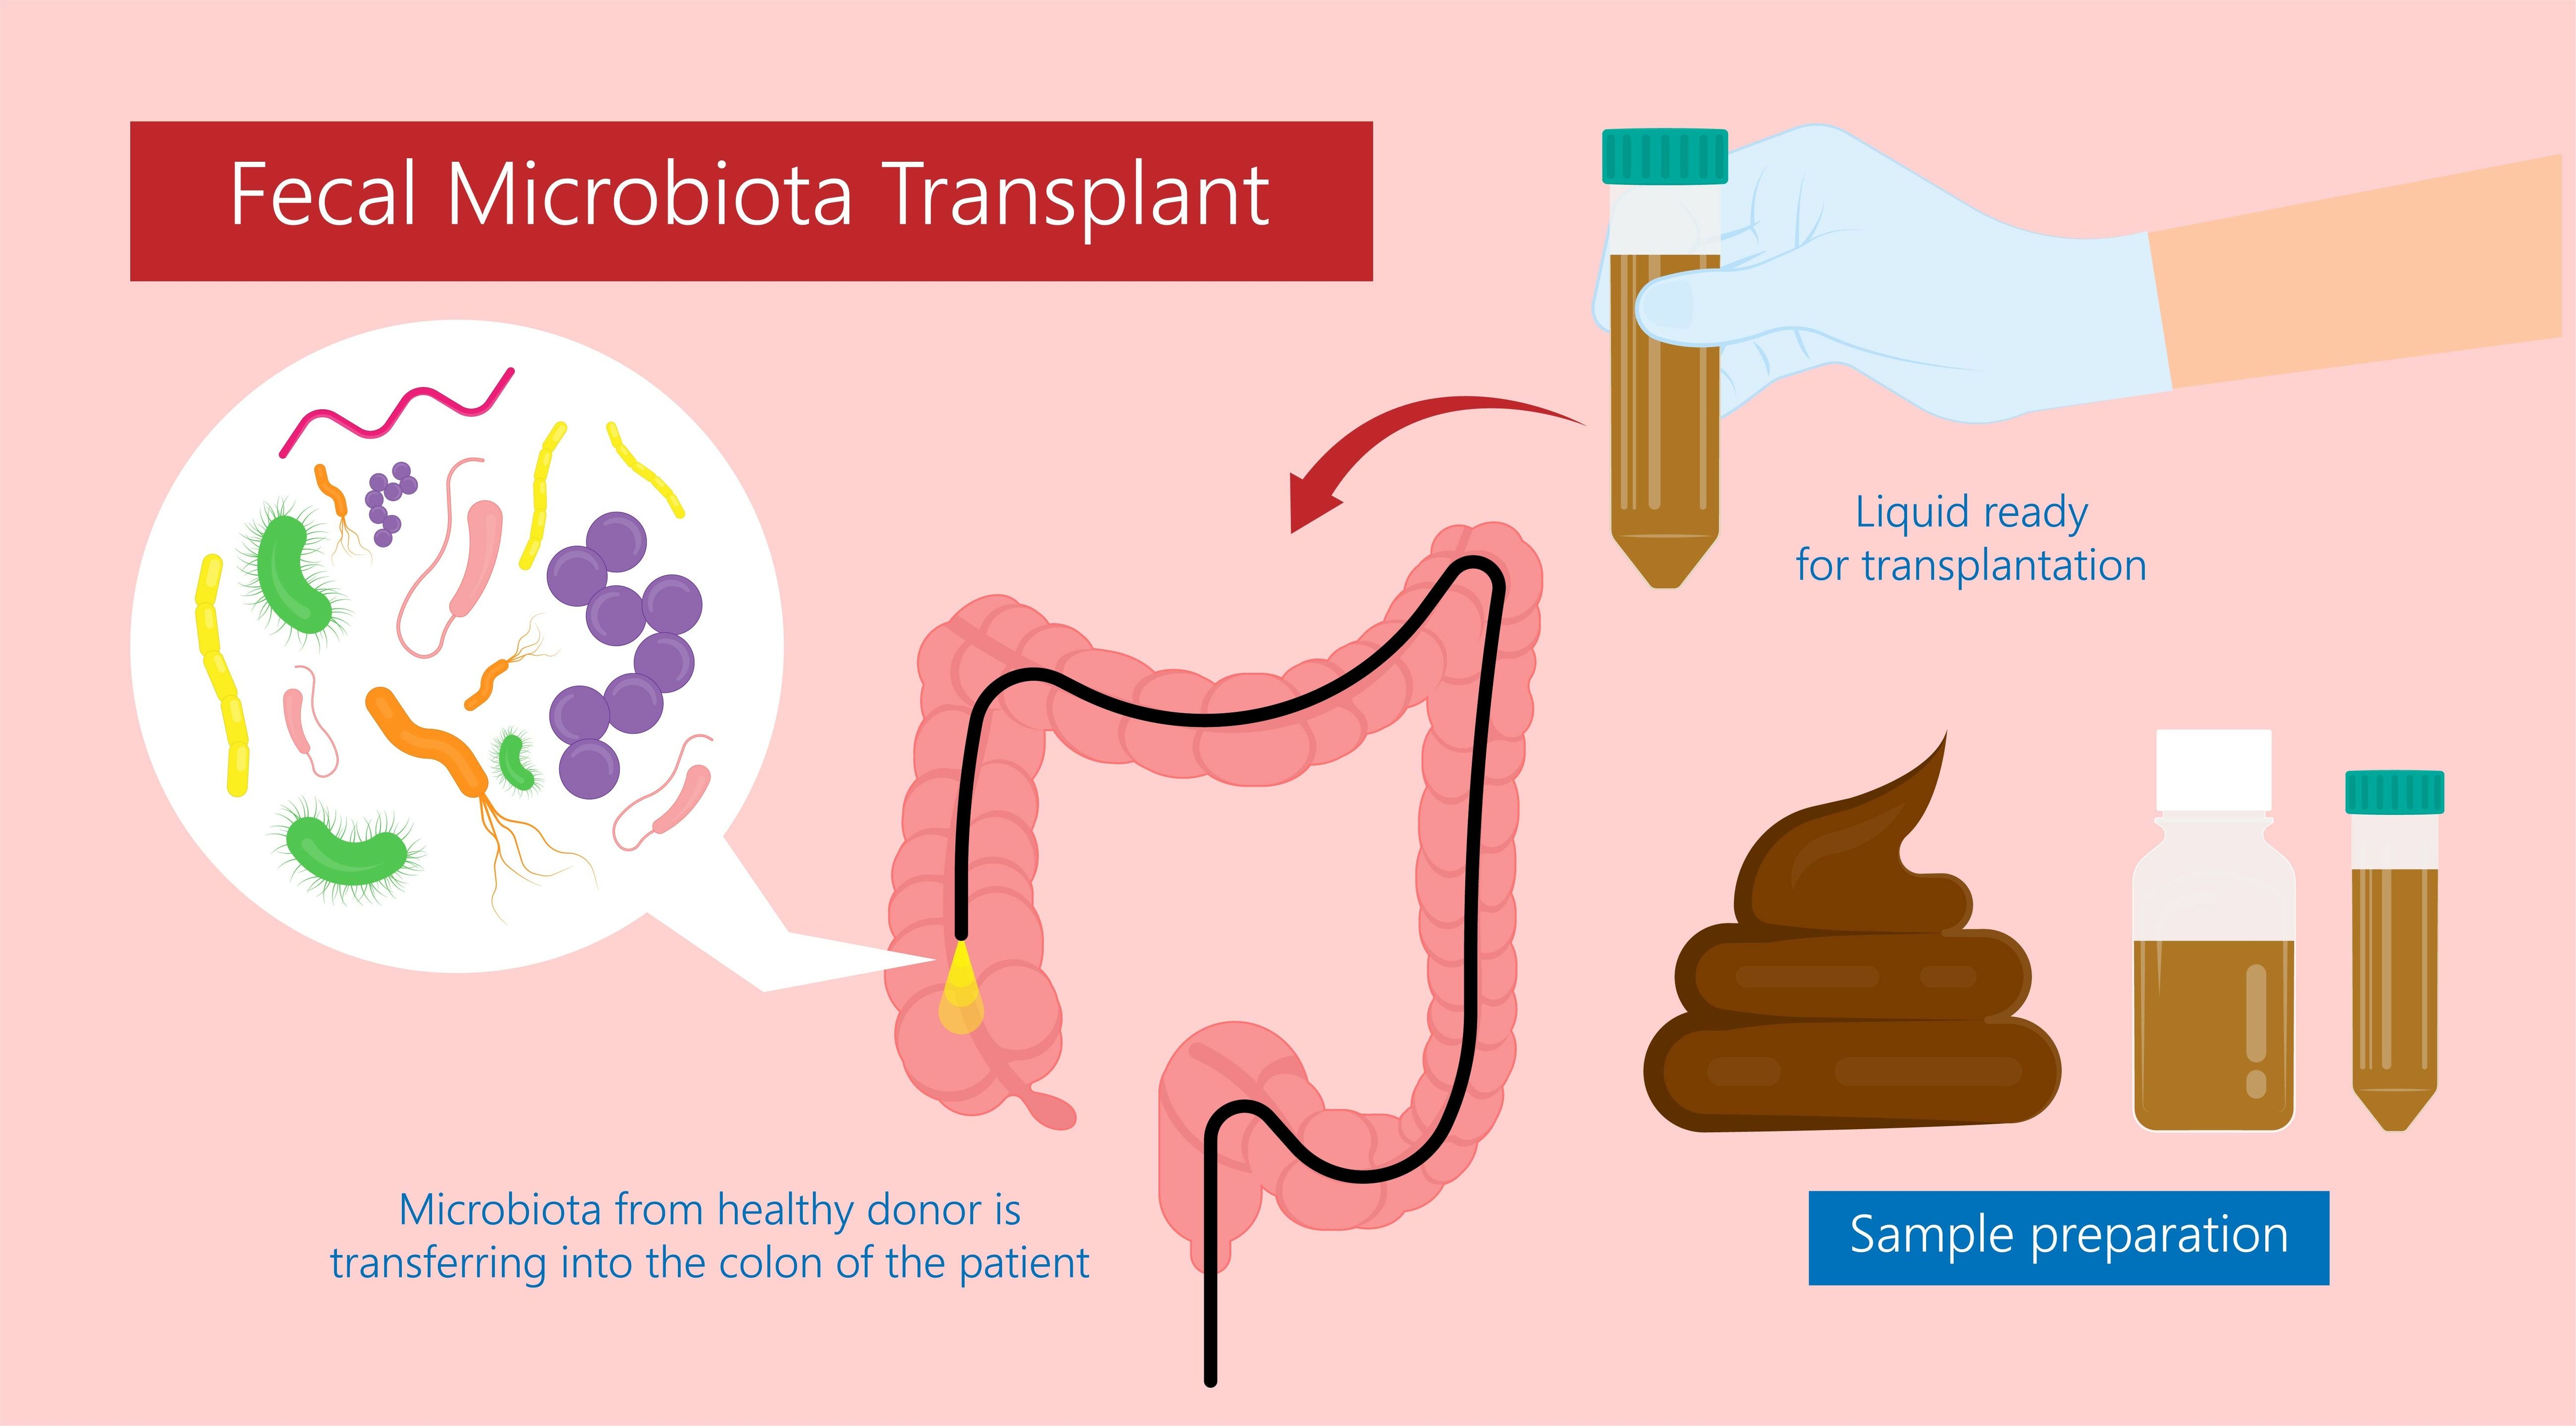 A fecal microbiota transplant (FMT) trial was halted early due to clear evidence the treatment was superior to placebo.